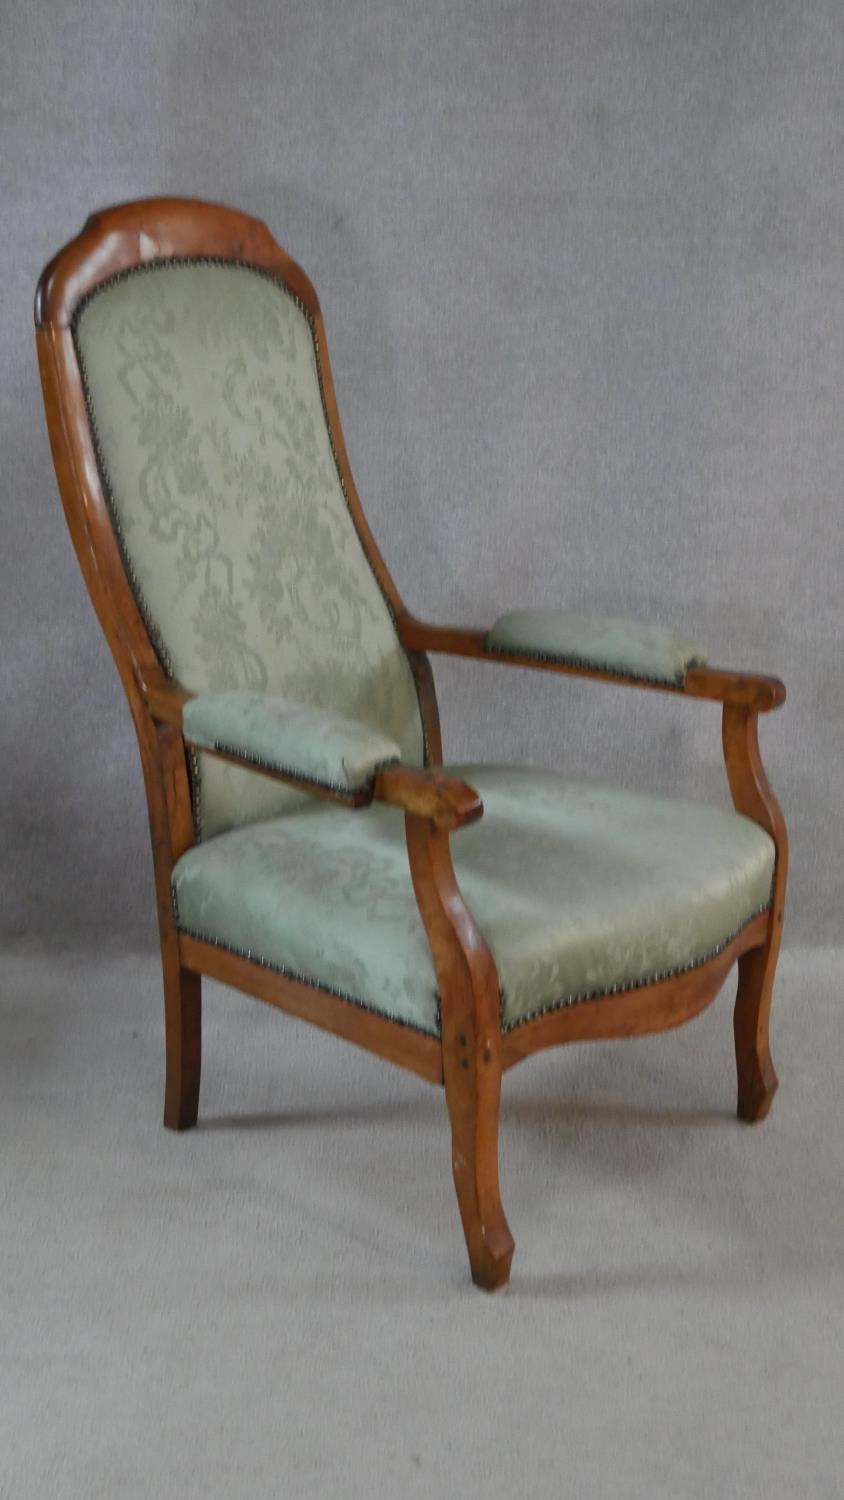 A 19th century French provincial fruitwood armchair in floral damask upholstery. H.109cm - Image 4 of 5